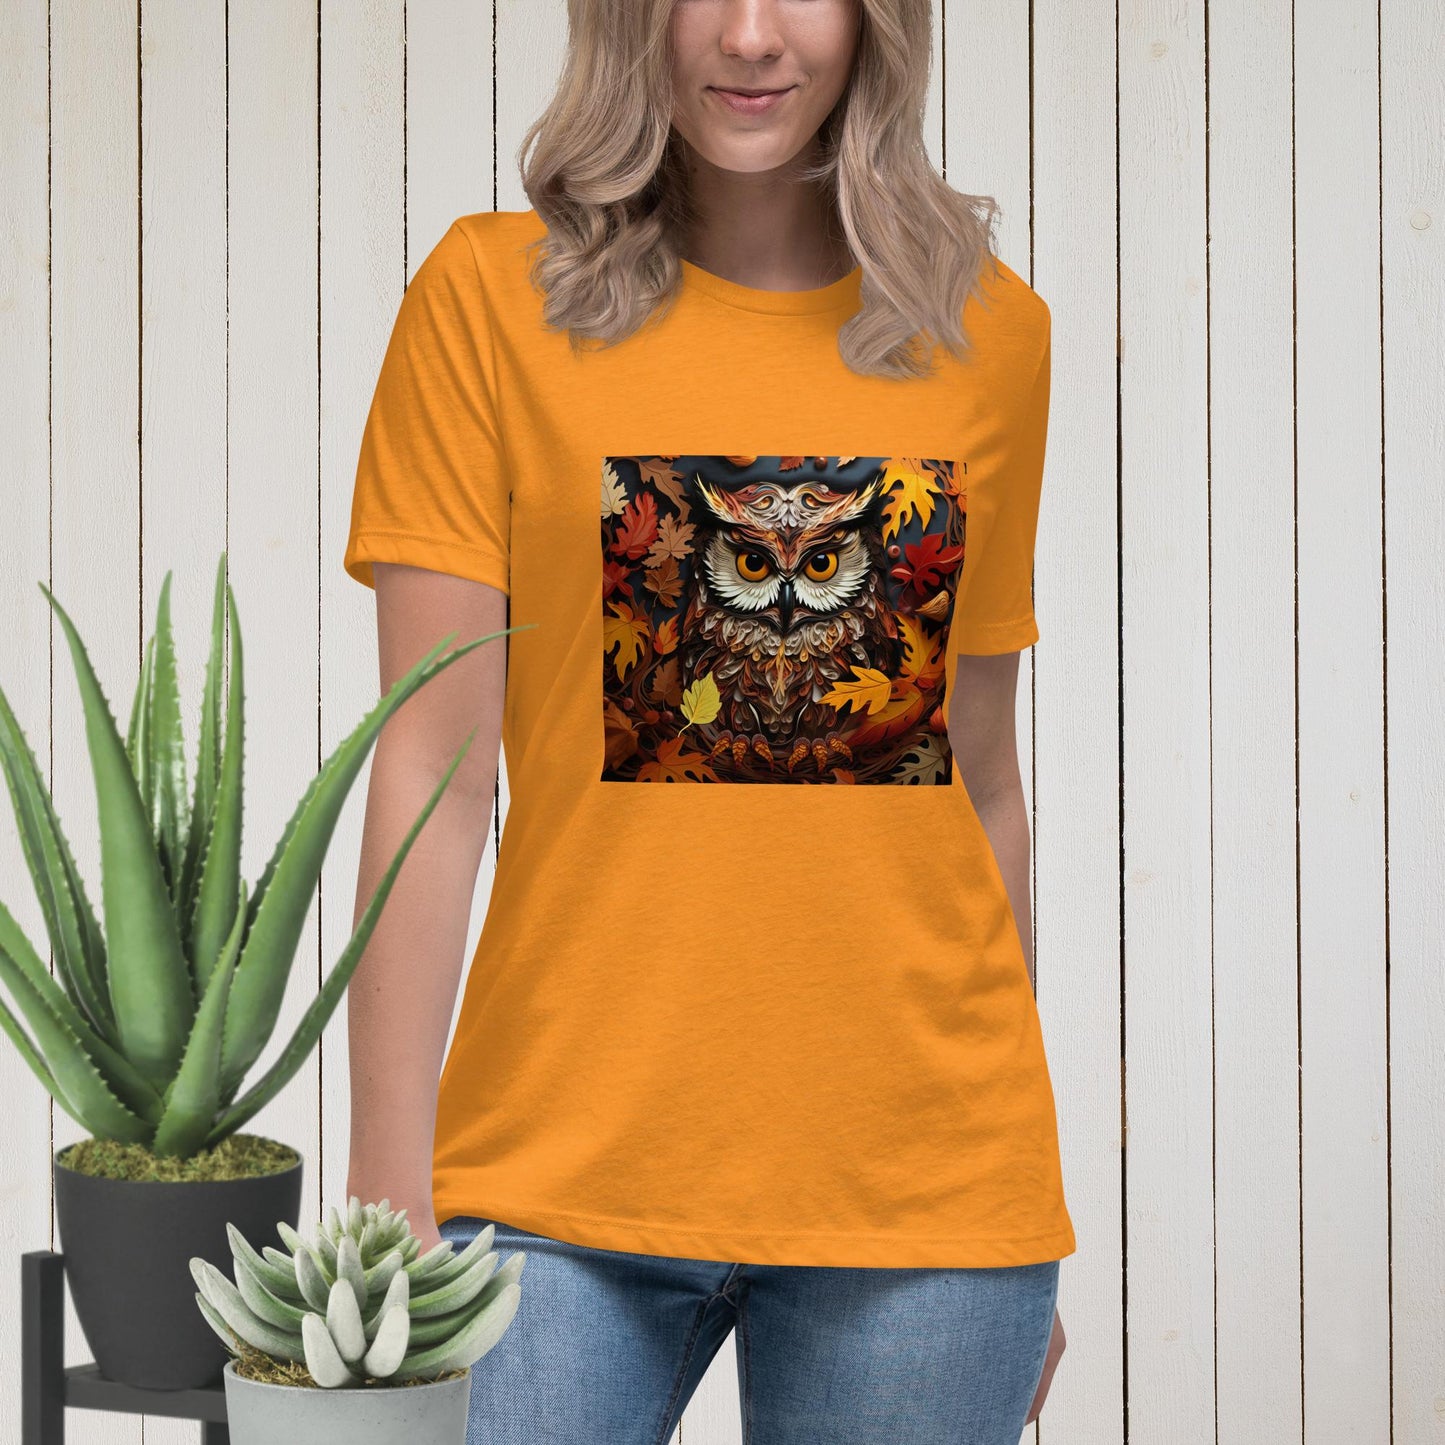 Owl in Fall Women's Relaxed T-Shirt - Legacy Creator IncHeather MarmaladeS